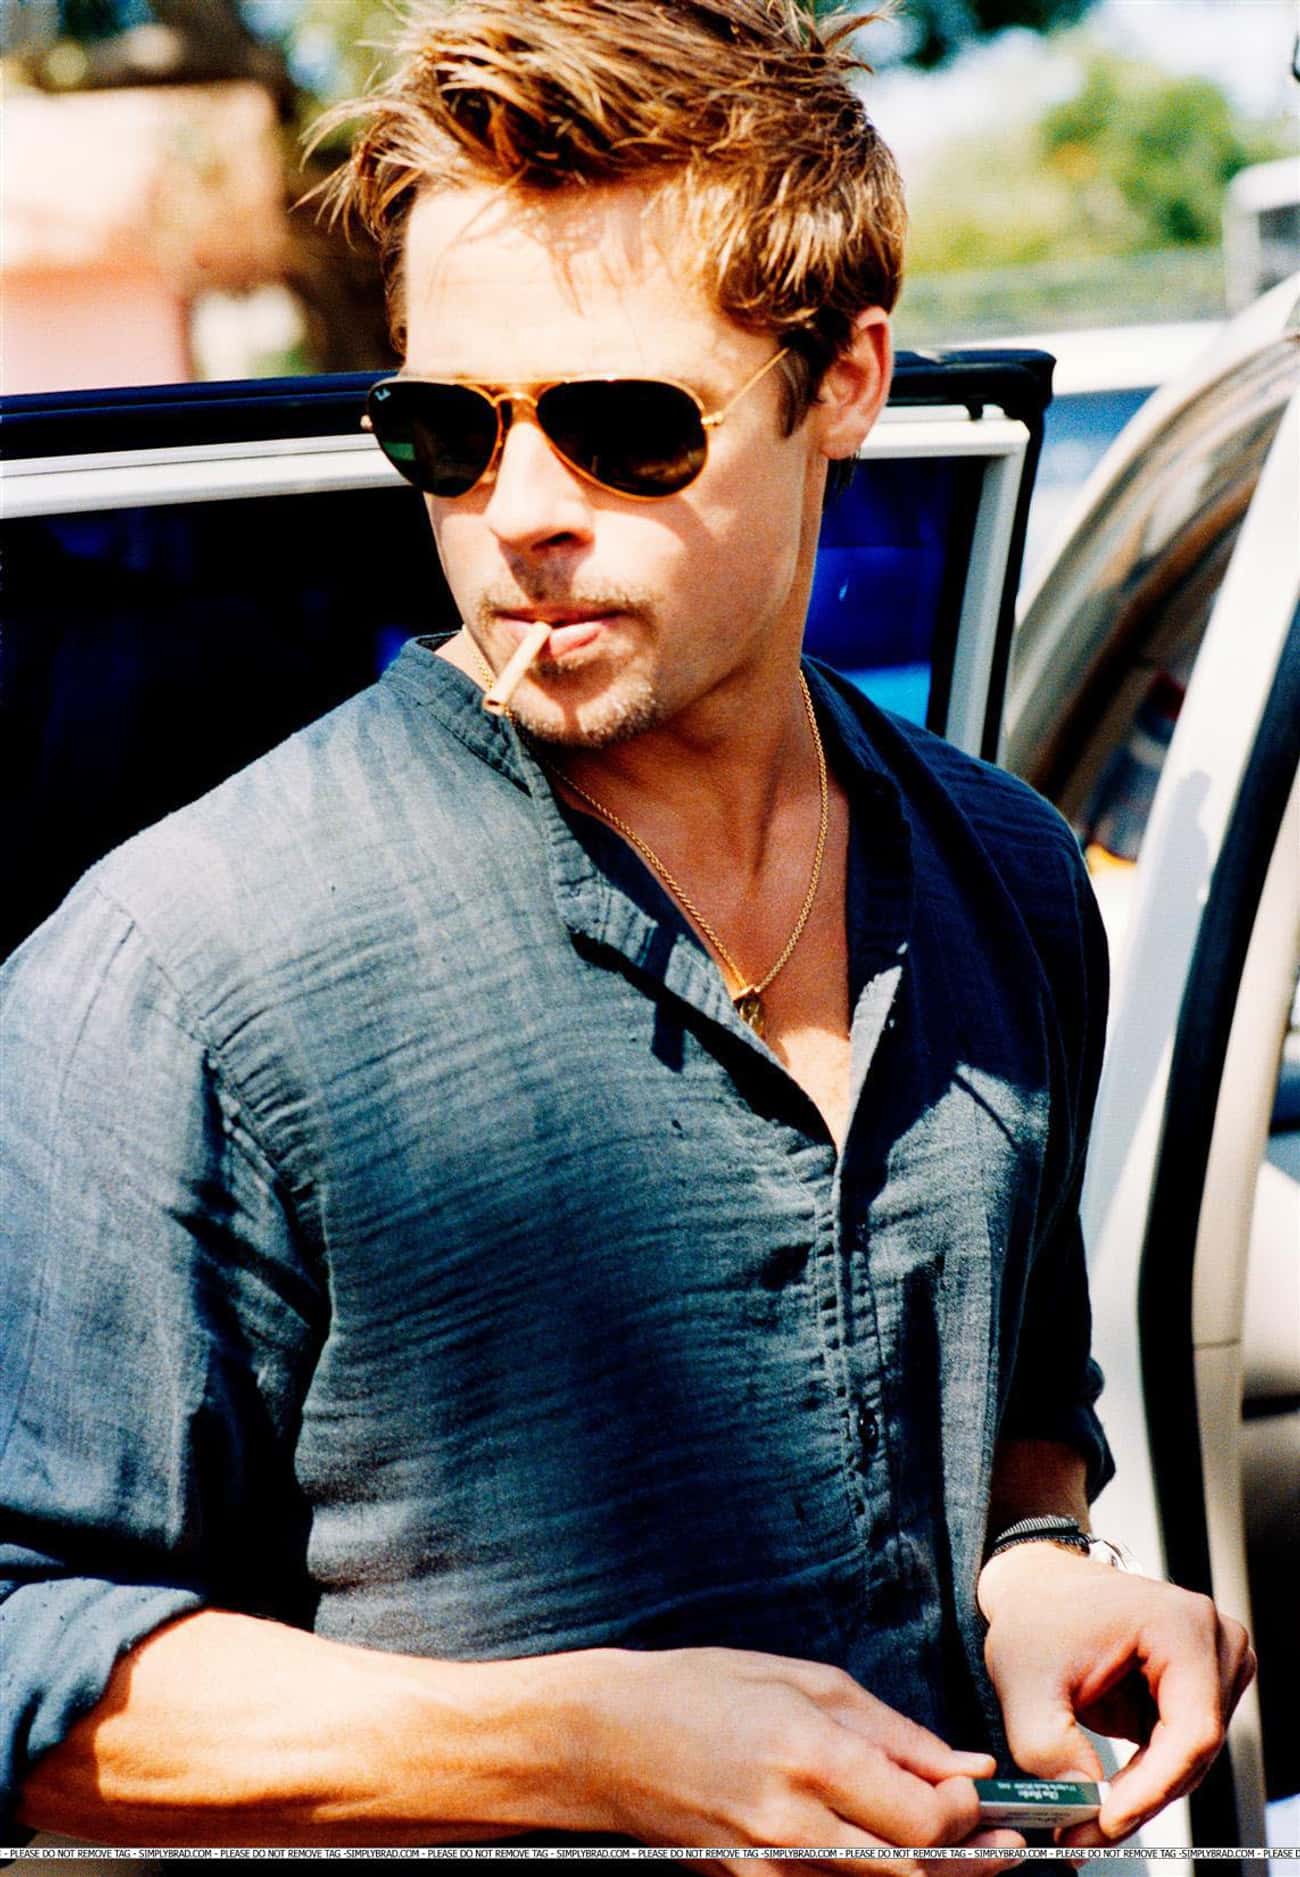 Could You Say Brad Pitt Is Smokin' Hot Here?